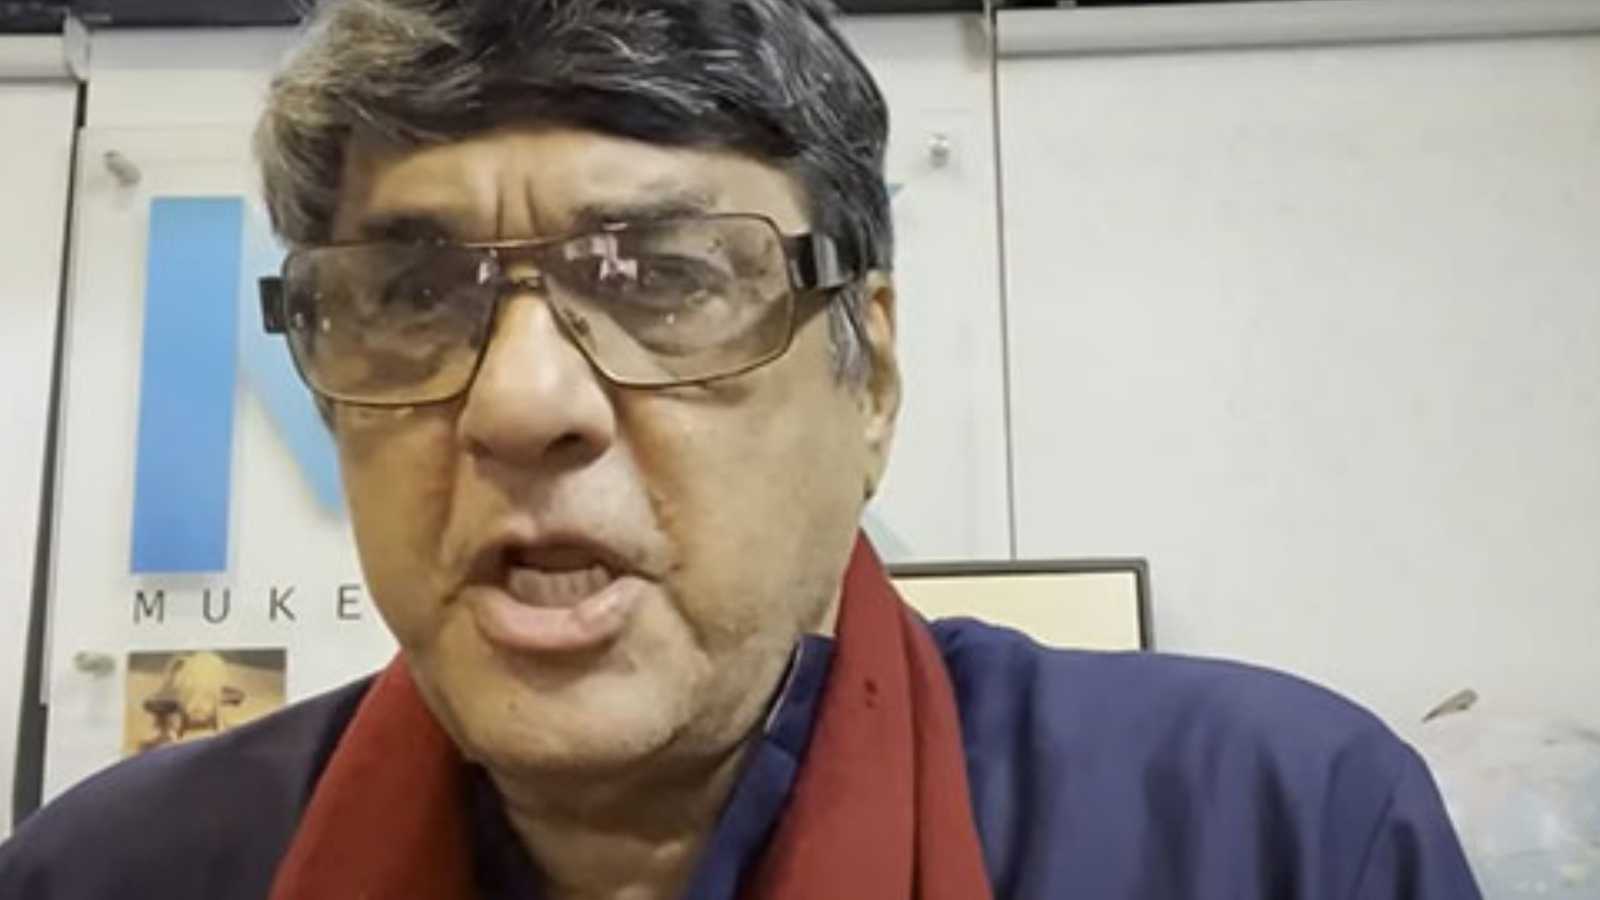 Mukesh Khanna says 'girls asking boys to have sex' are doing 'dhanda', trouble comes knocking after viral misogynist comments